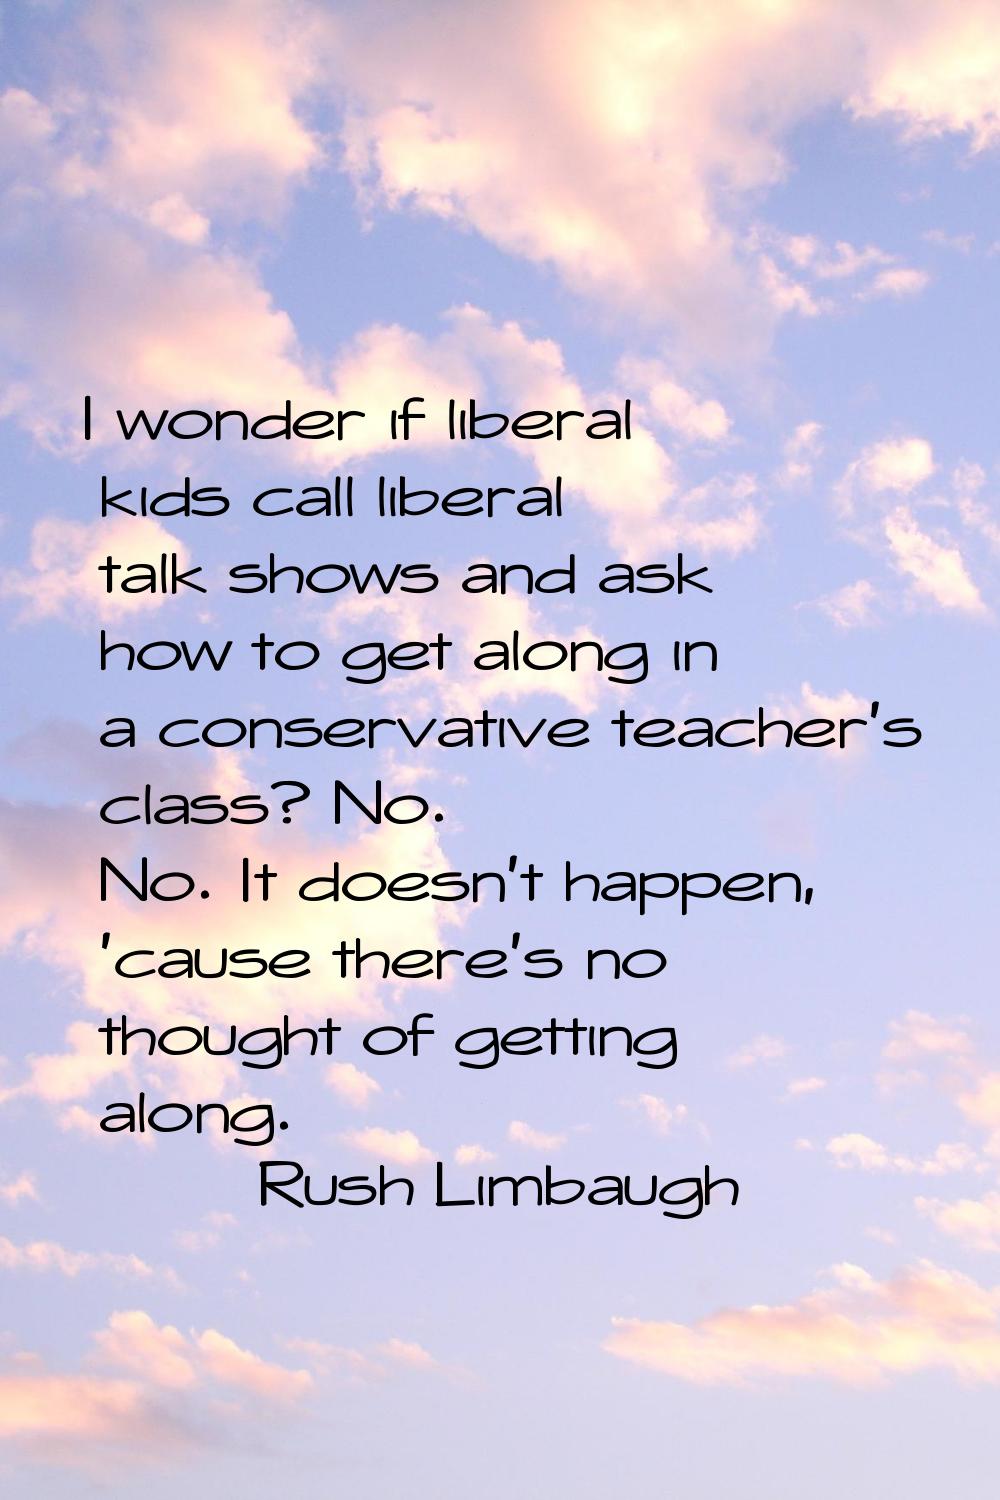 I wonder if liberal kids call liberal talk shows and ask how to get along in a conservative teacher